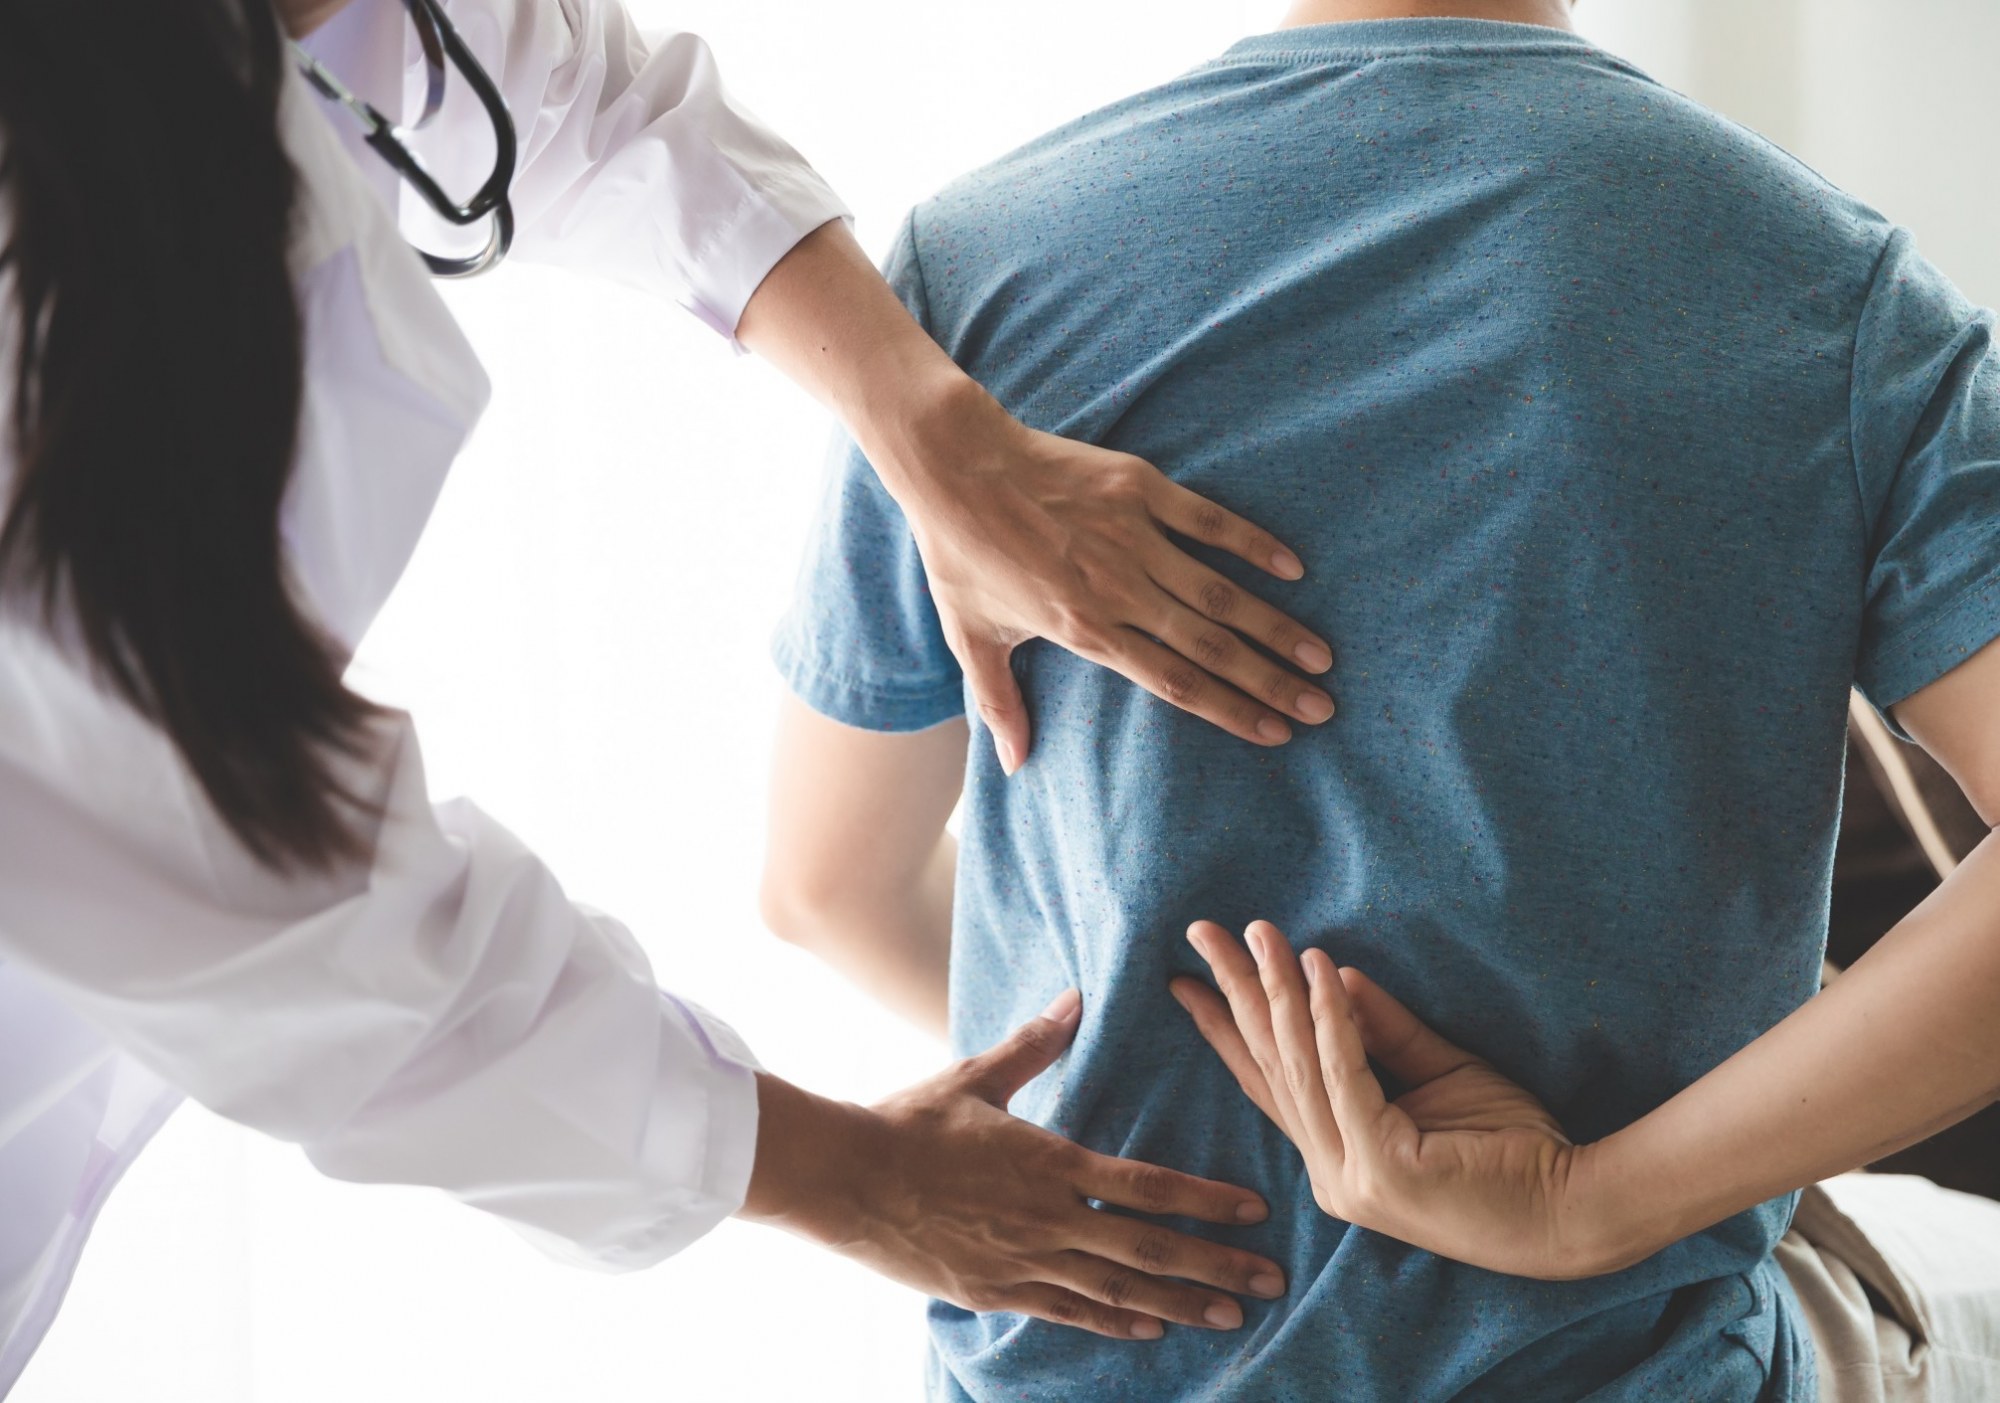 Herniated Disk Symptoms & Treatment Options Advanced Surgery Center. 